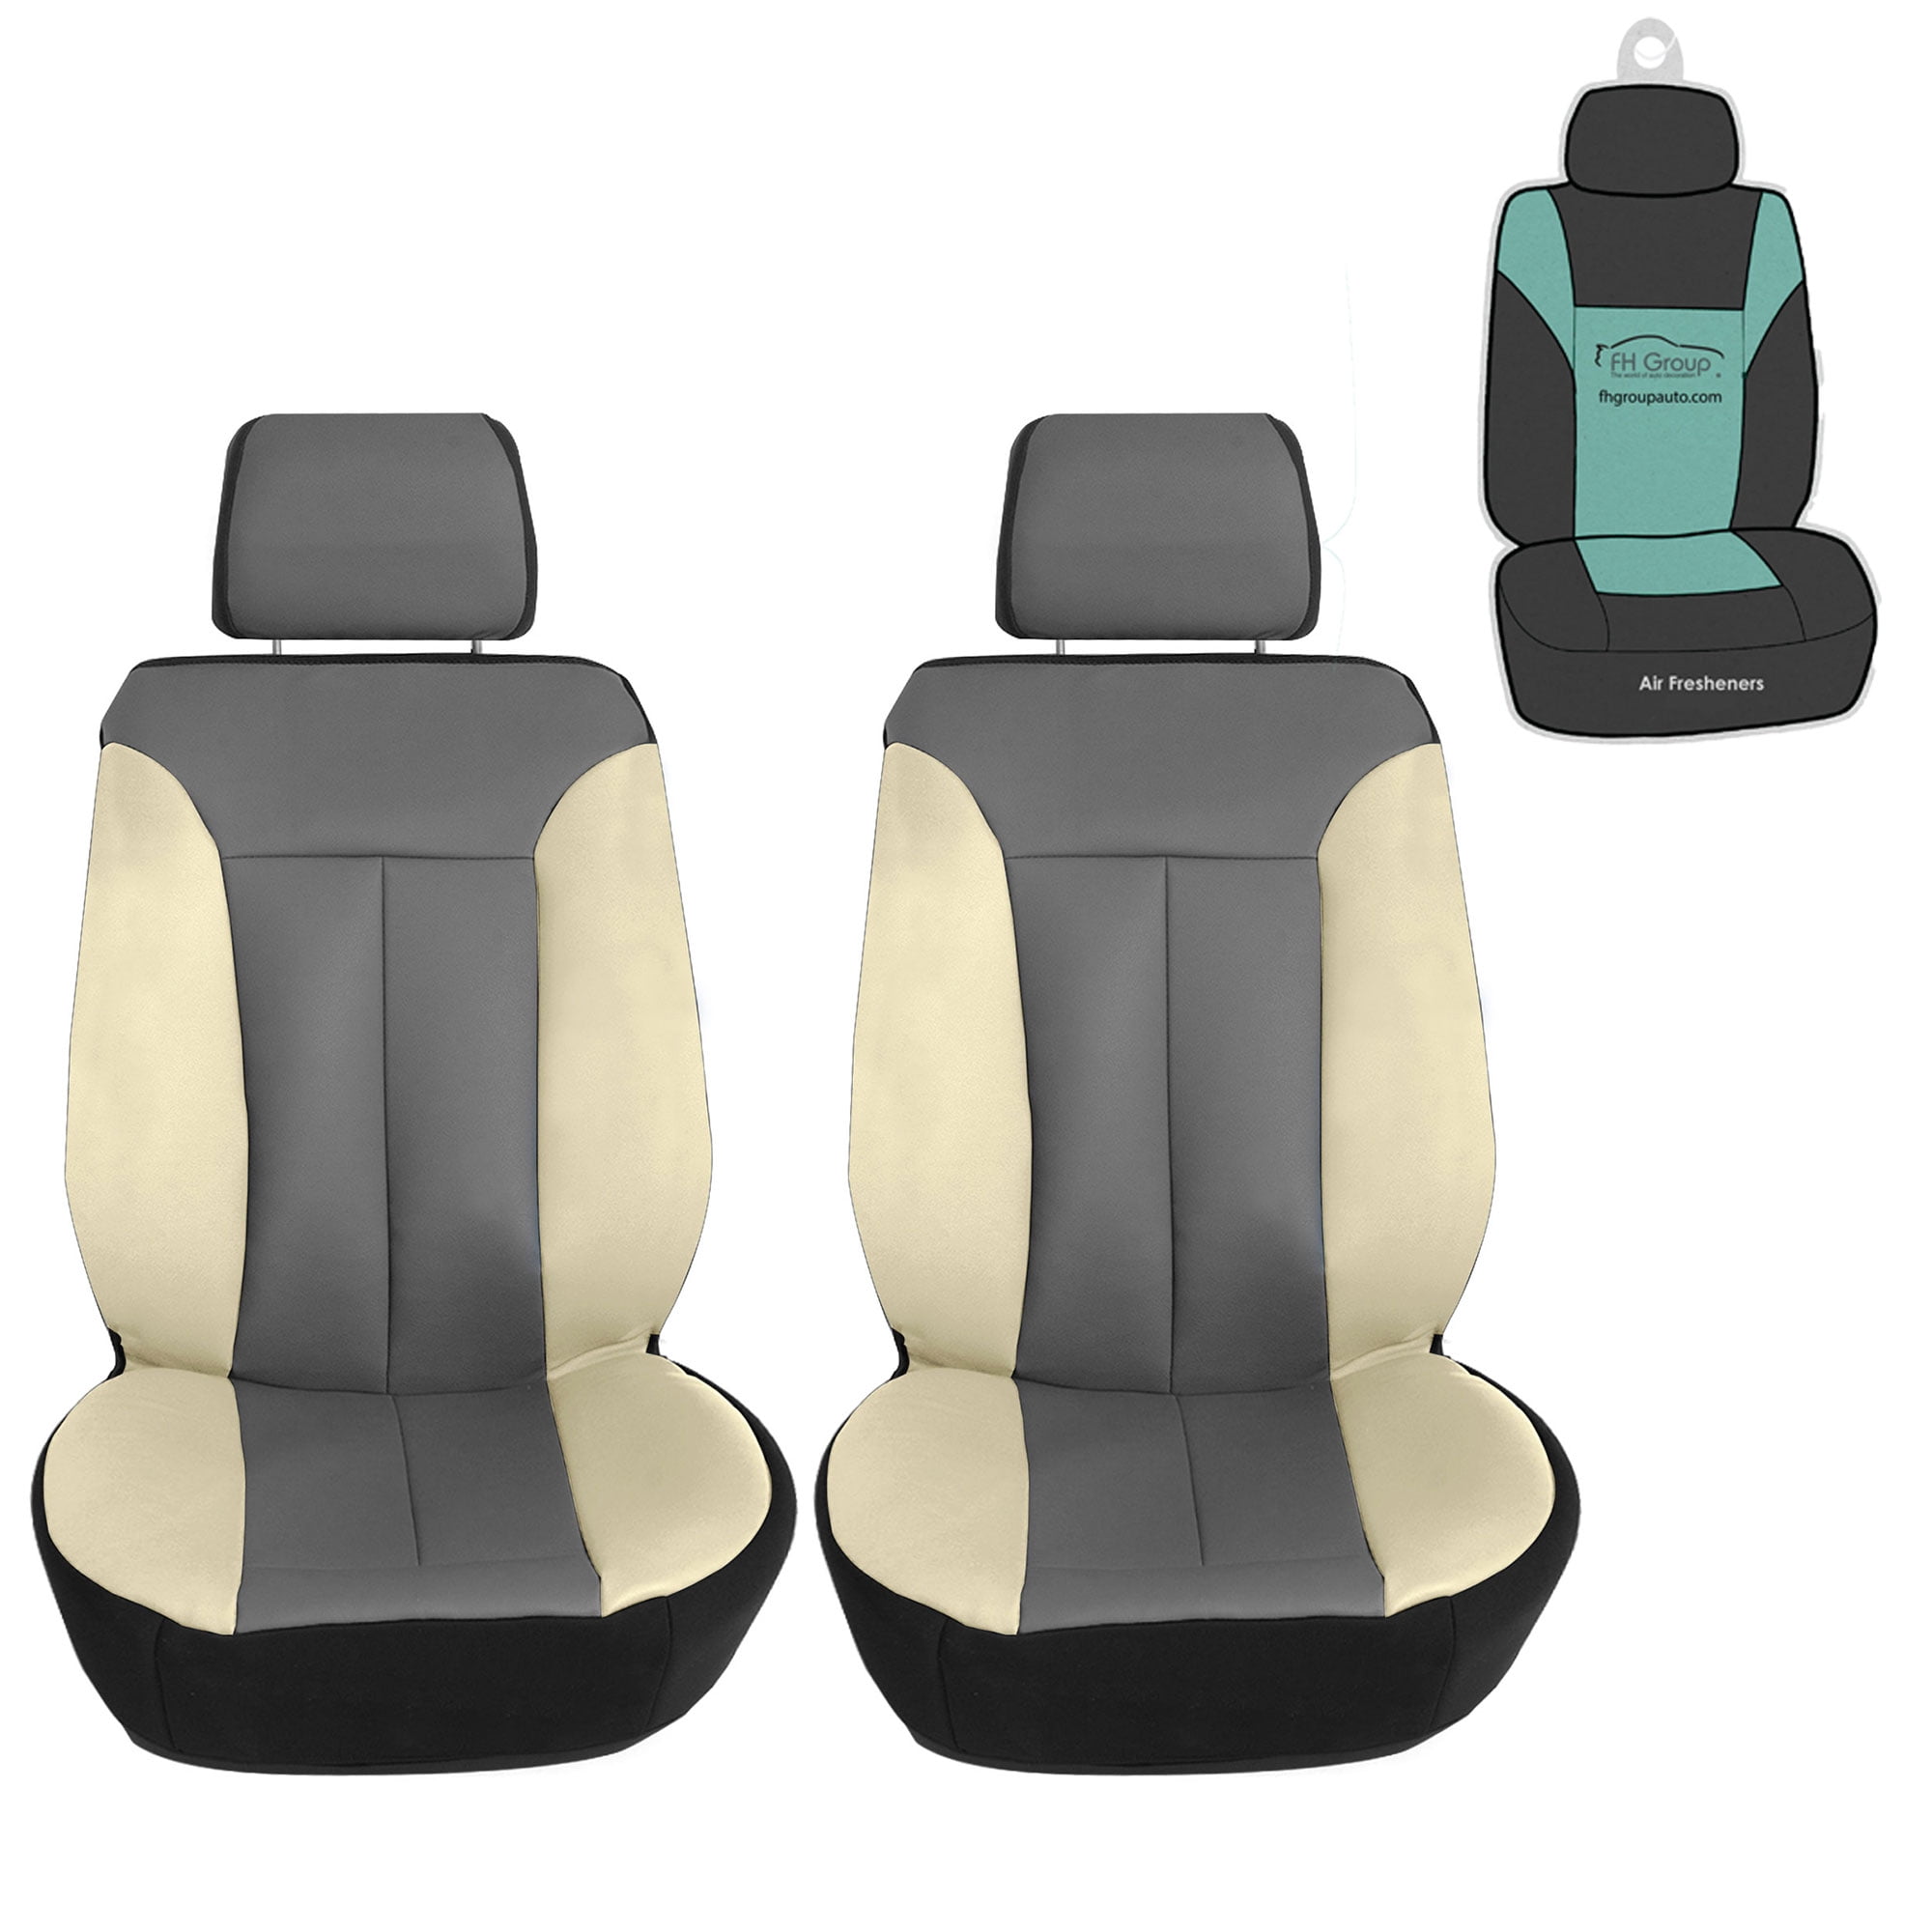 FH Group FH-FB102102 Classic High-Back Cloth Pair Car Seat Covers Beige/Black Color- Fit Most Car or Van SUV Truck 